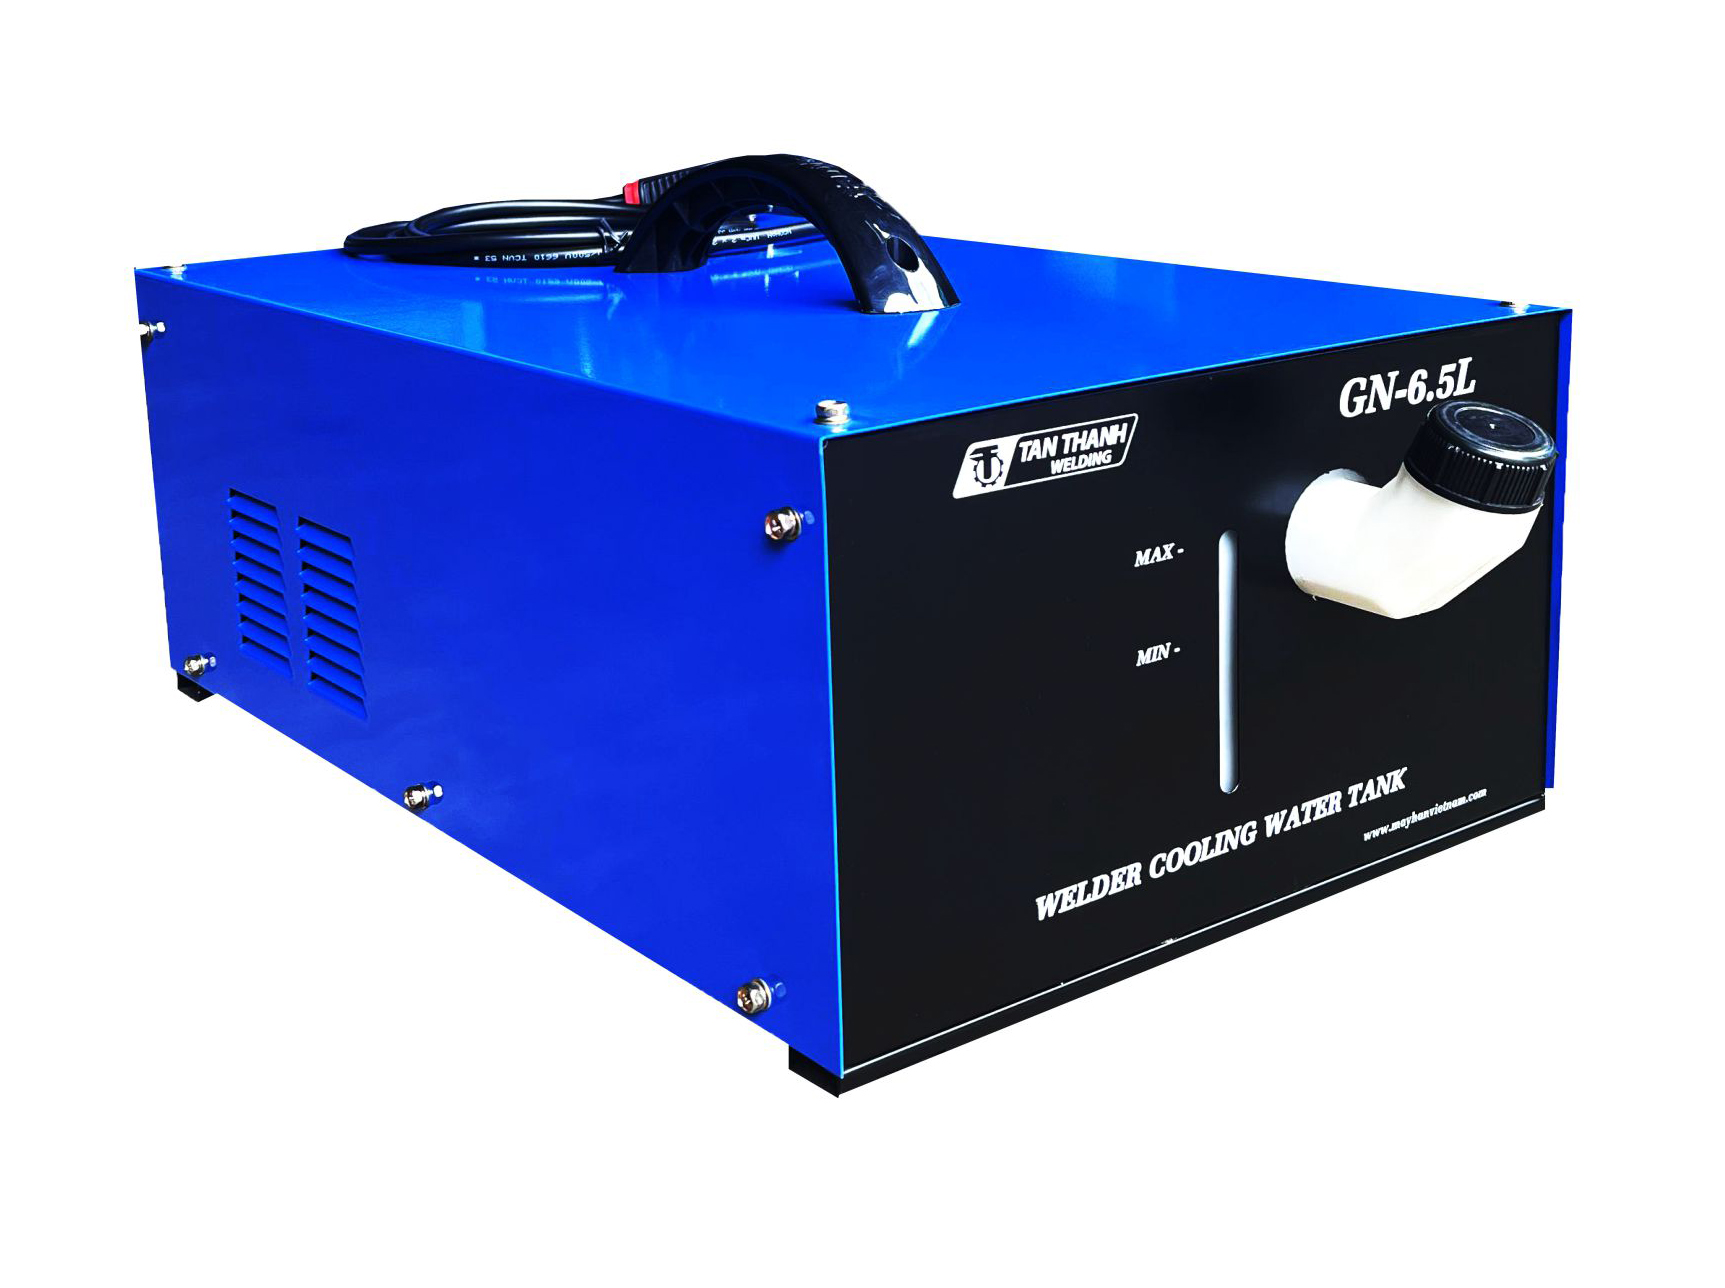 6.5L water cooling tank